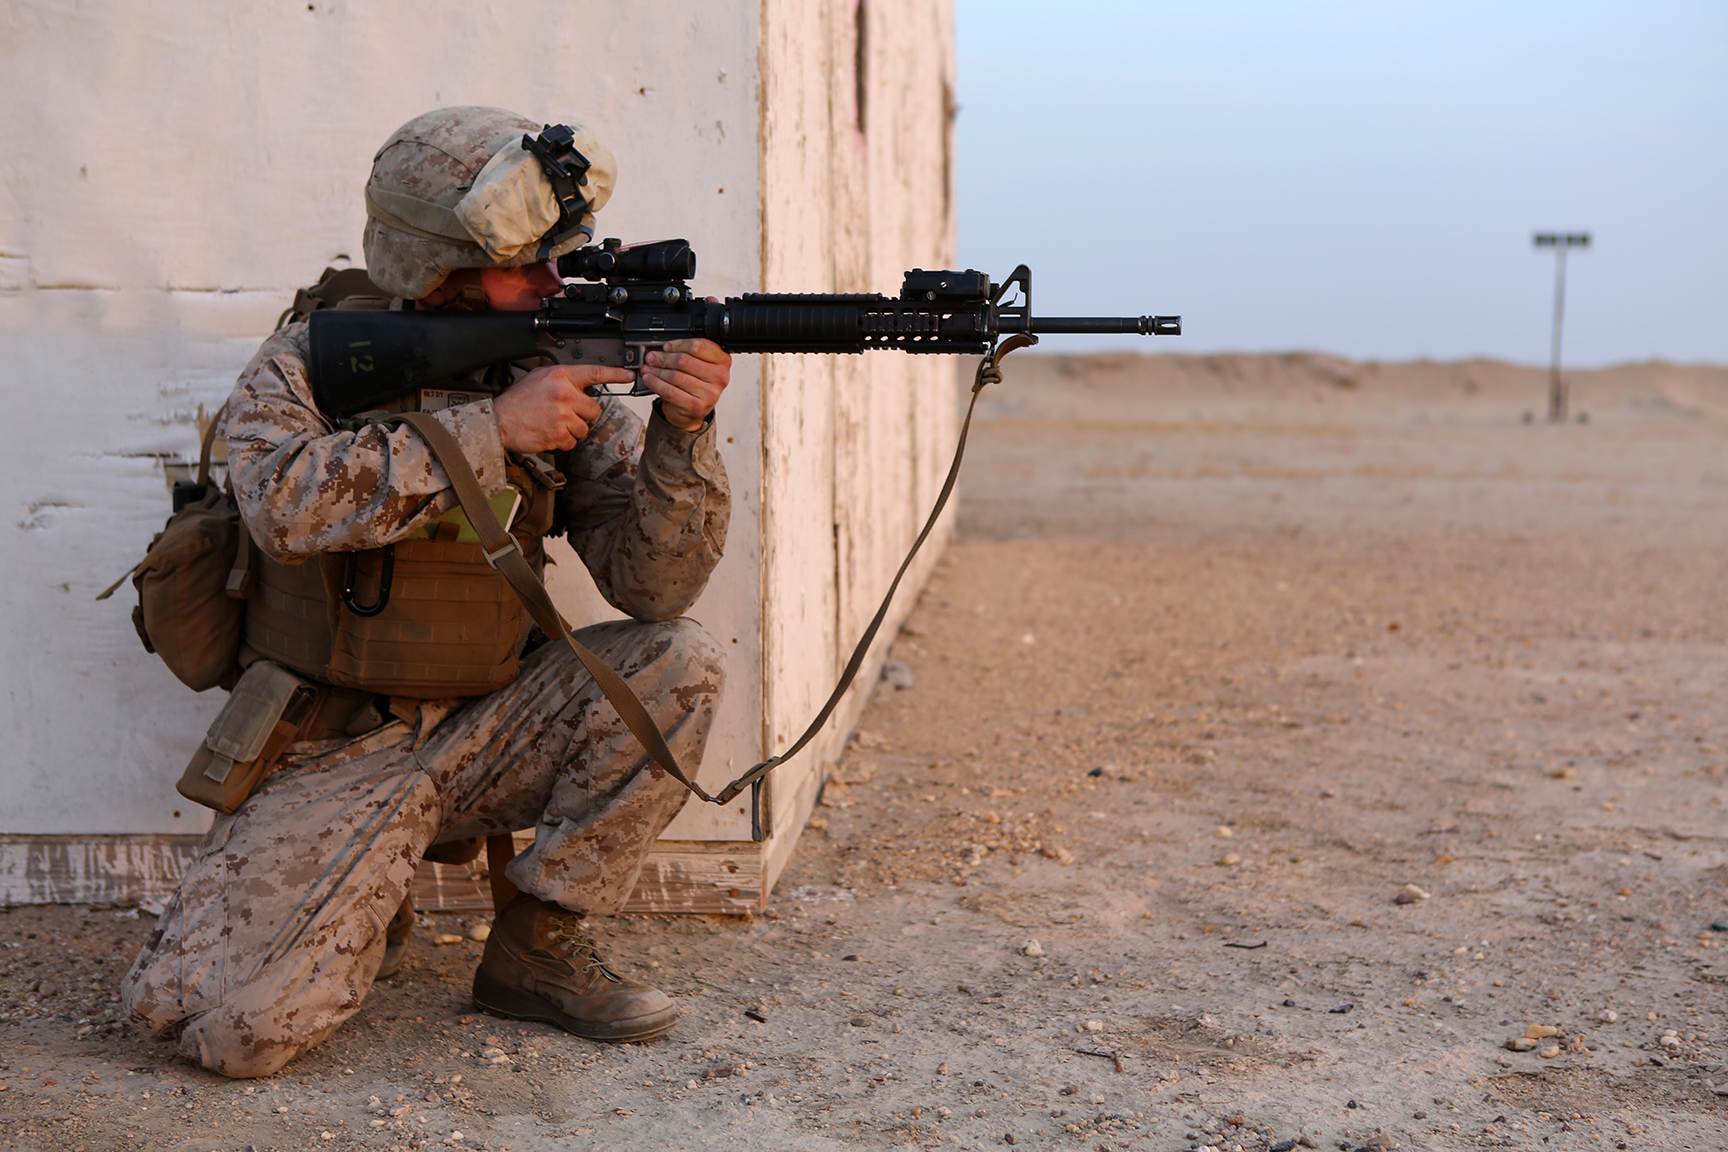 a soldier with a rifle sitting in the dirt